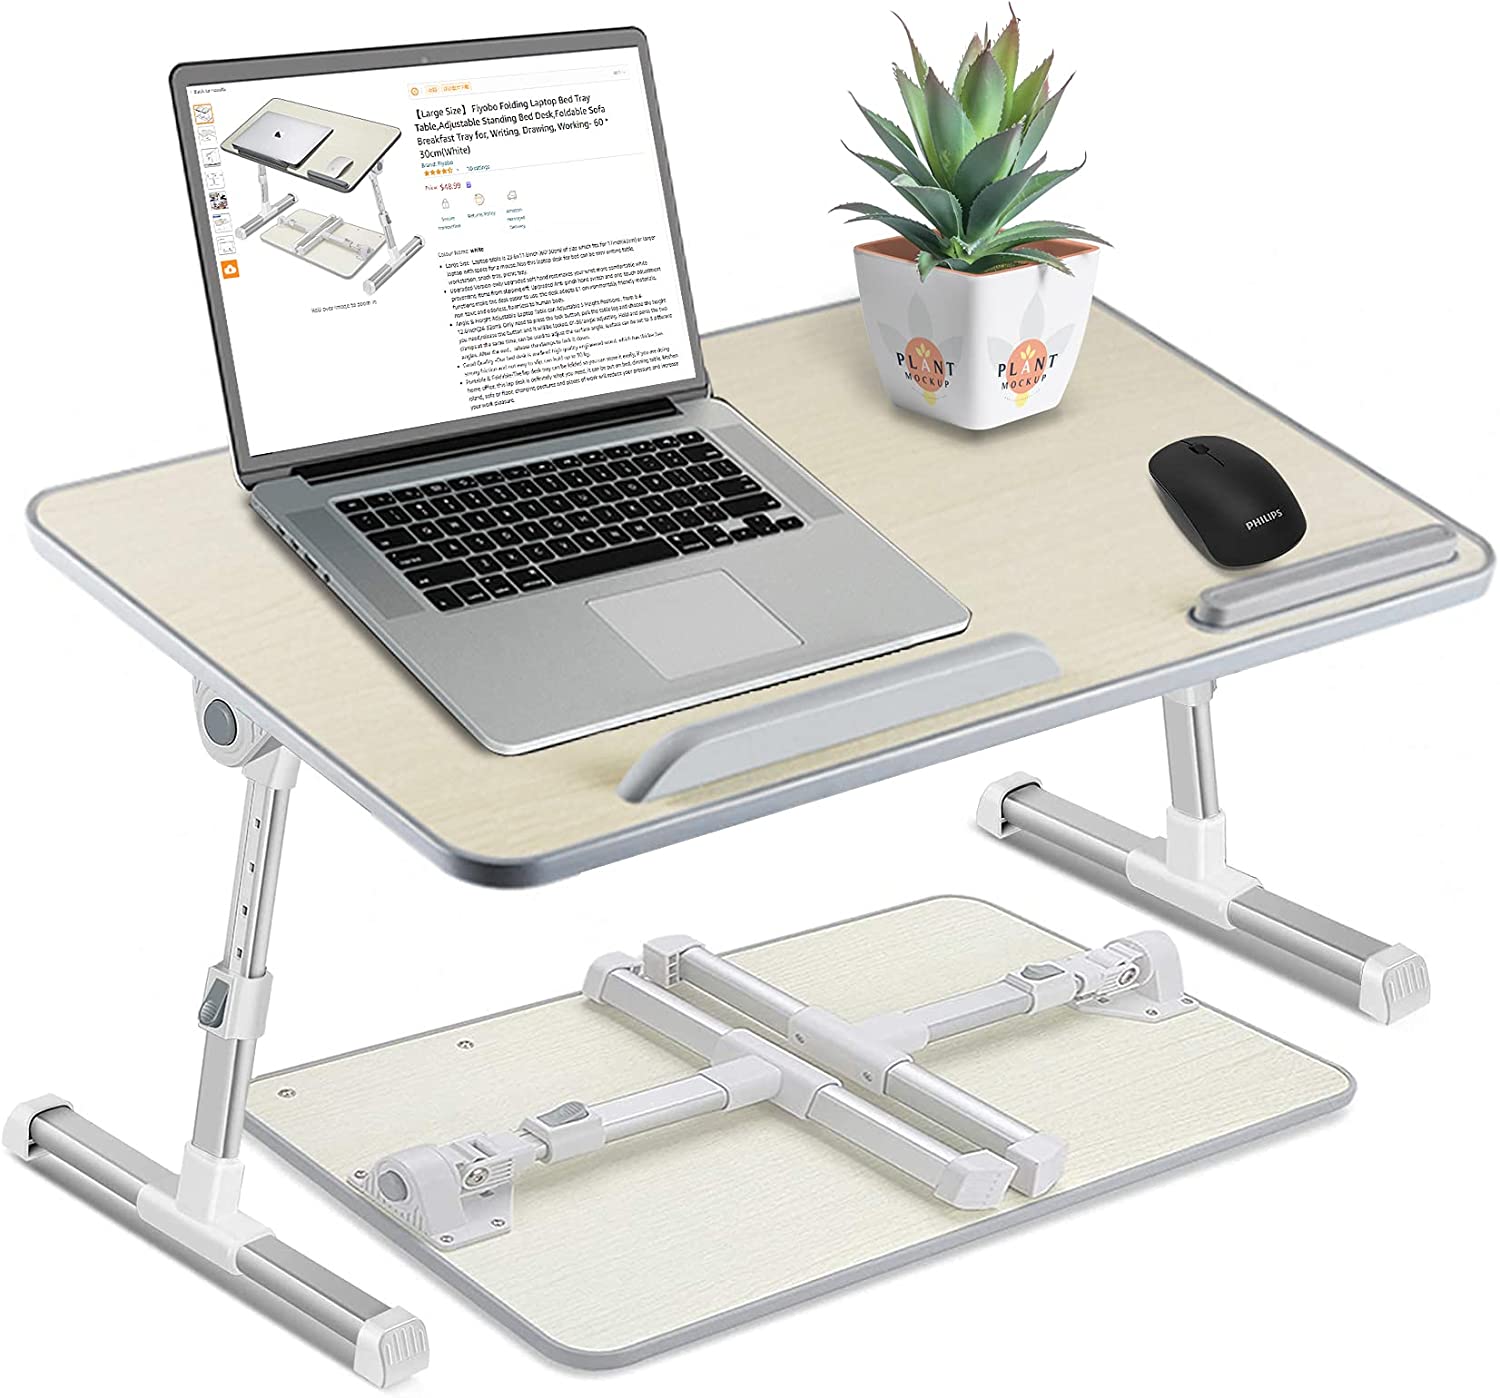 Large Size Folding and Adjustable Laptop Bed Tray Table for, Writing, Drawing and Working - 60 x 30 cm (White)